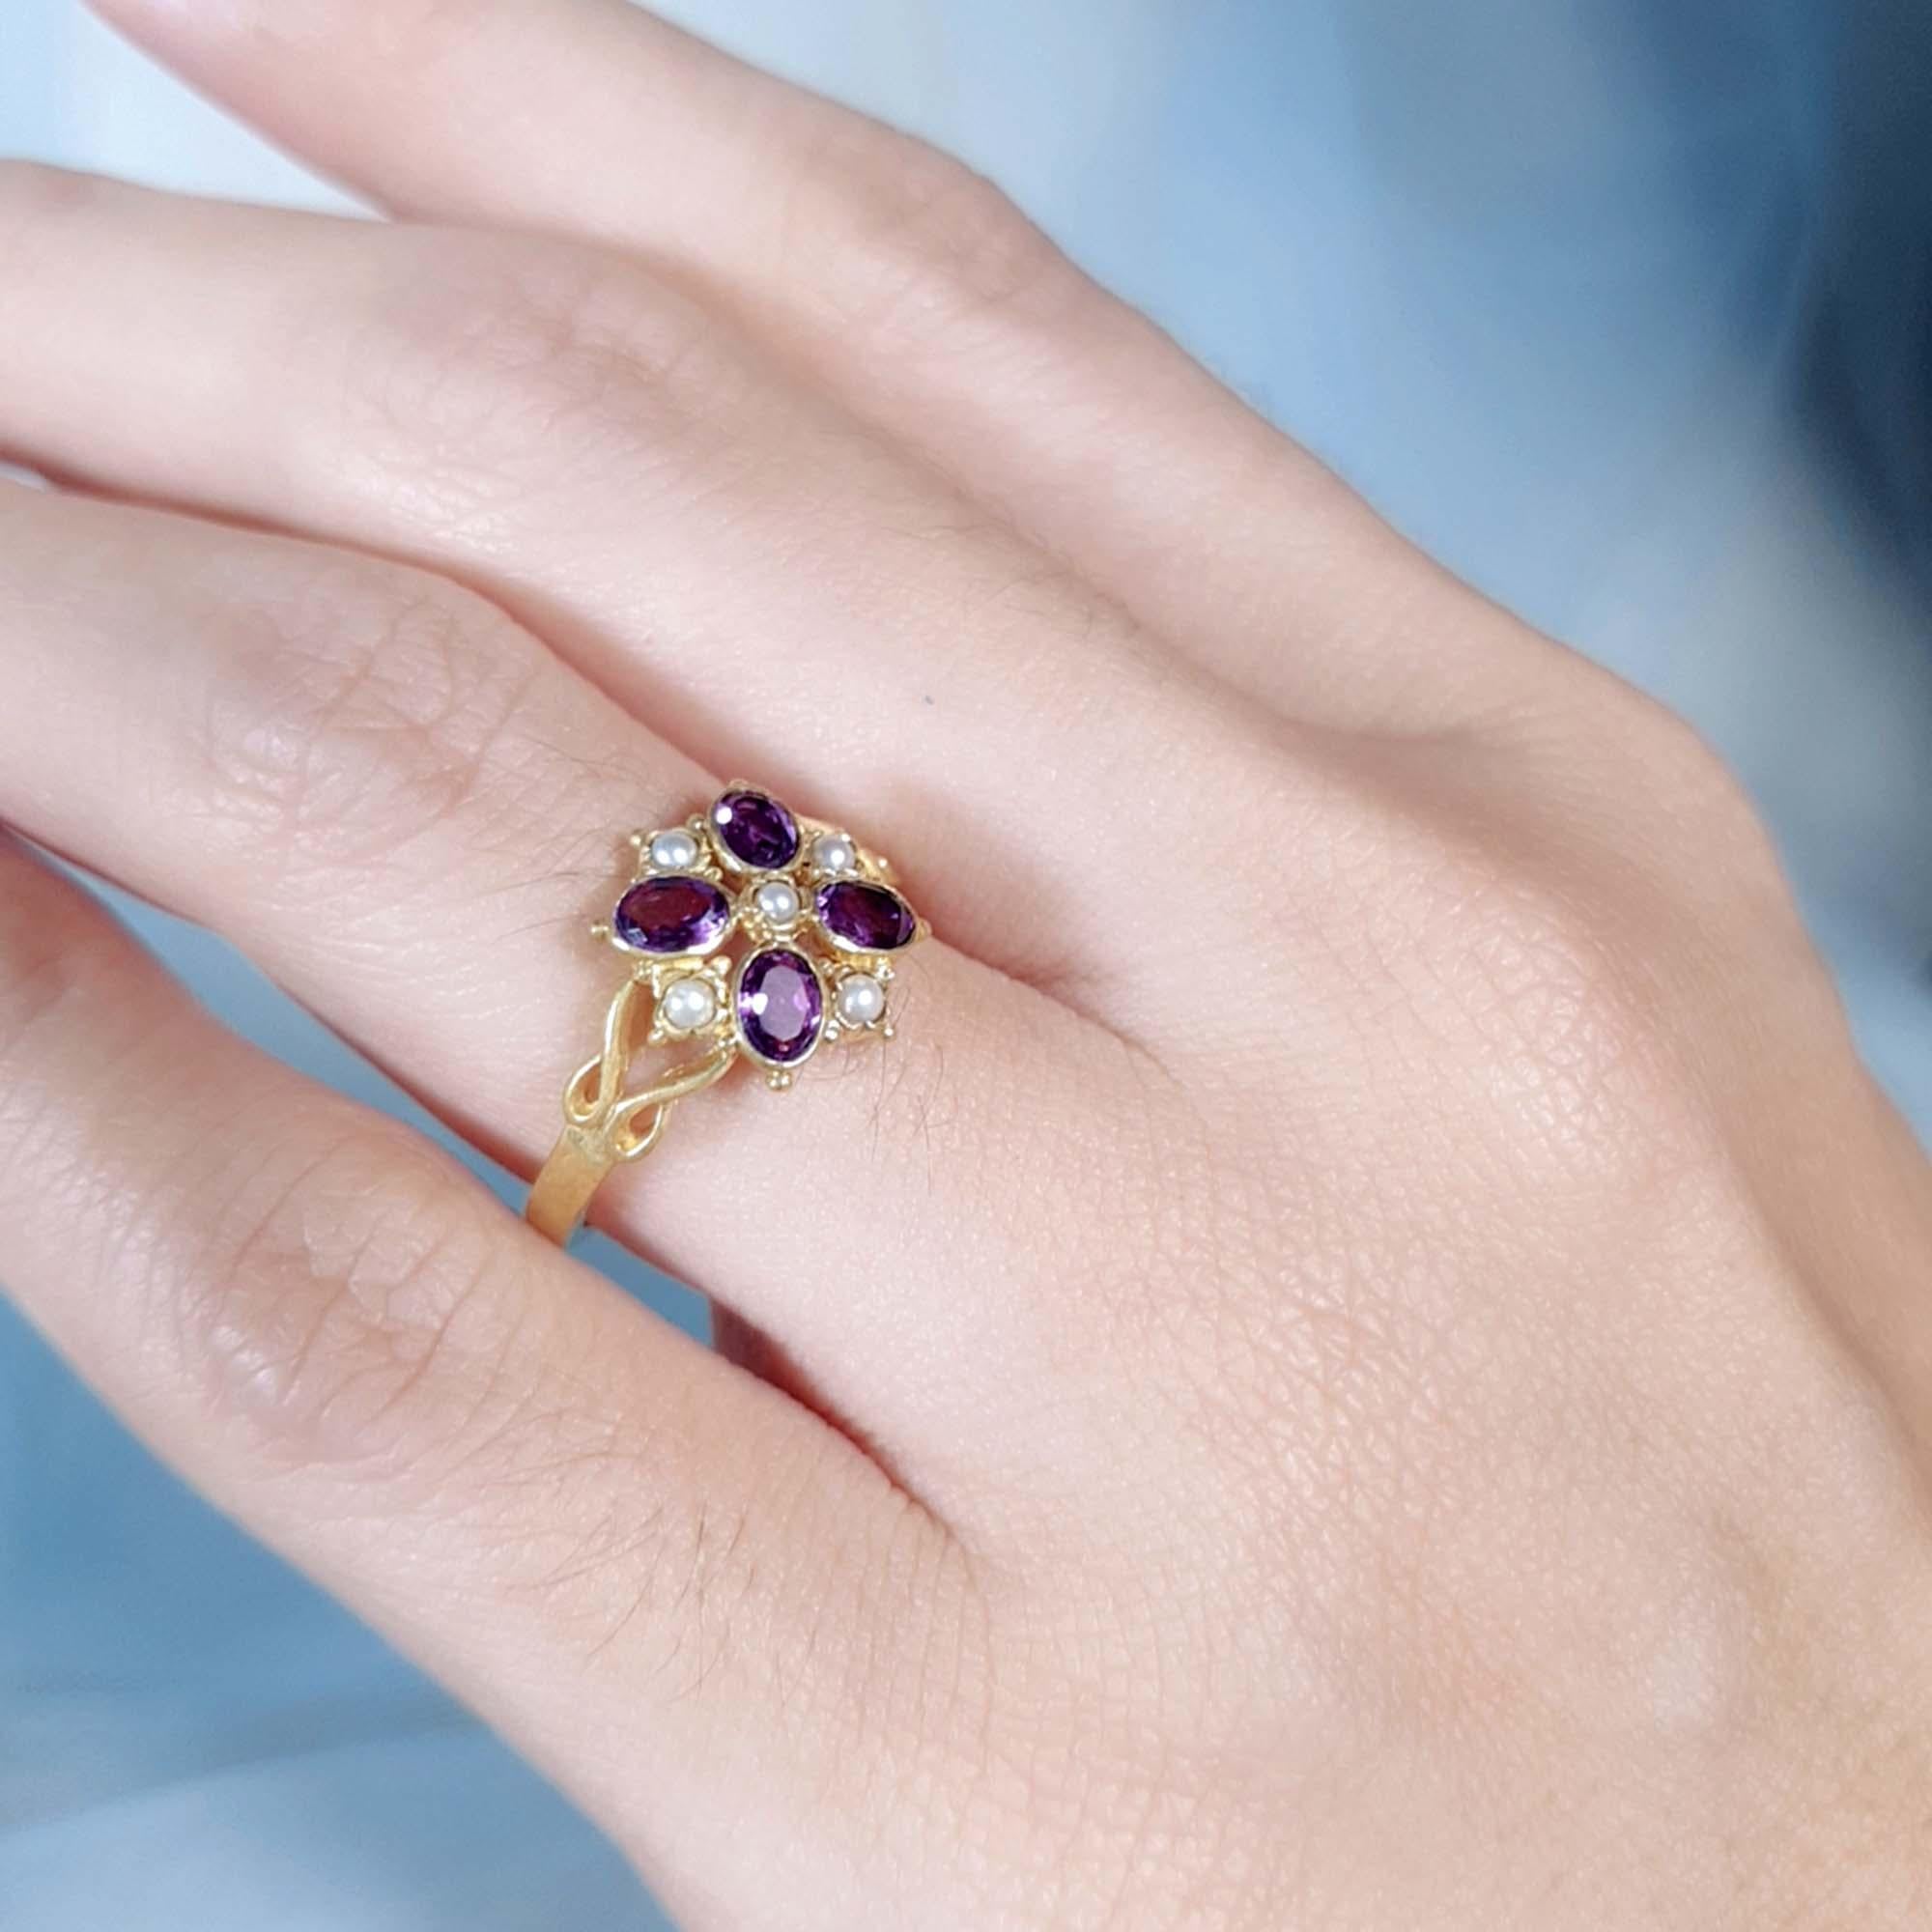 For Sale:  Natural Amethyst and Pearl Vintage Style Floral Cluster Ring in Solid 9K Gold 9